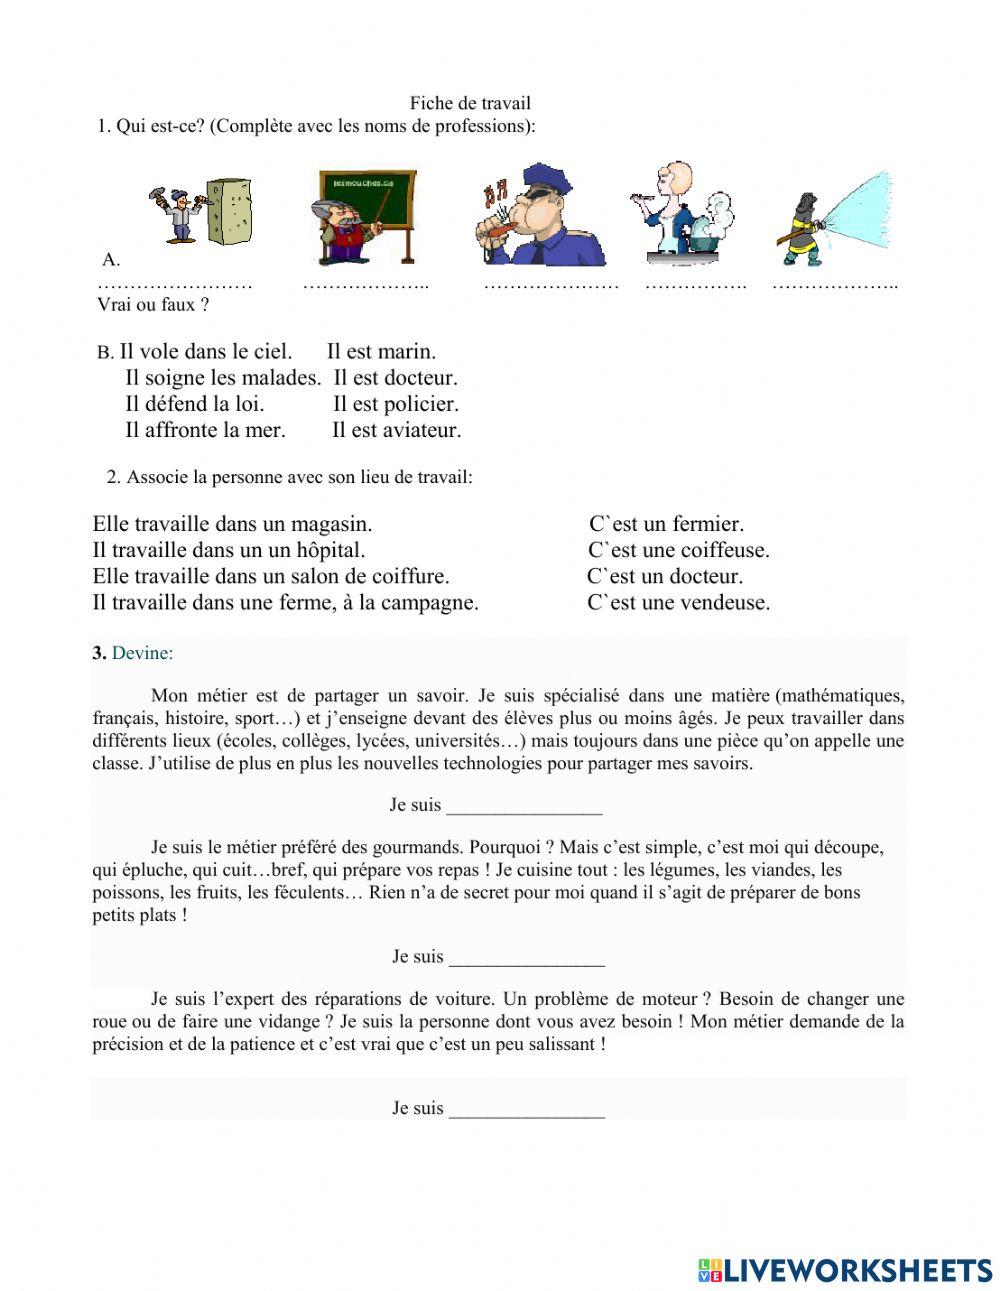 Les métiers exercise for Grade 5 | Live Worksheets